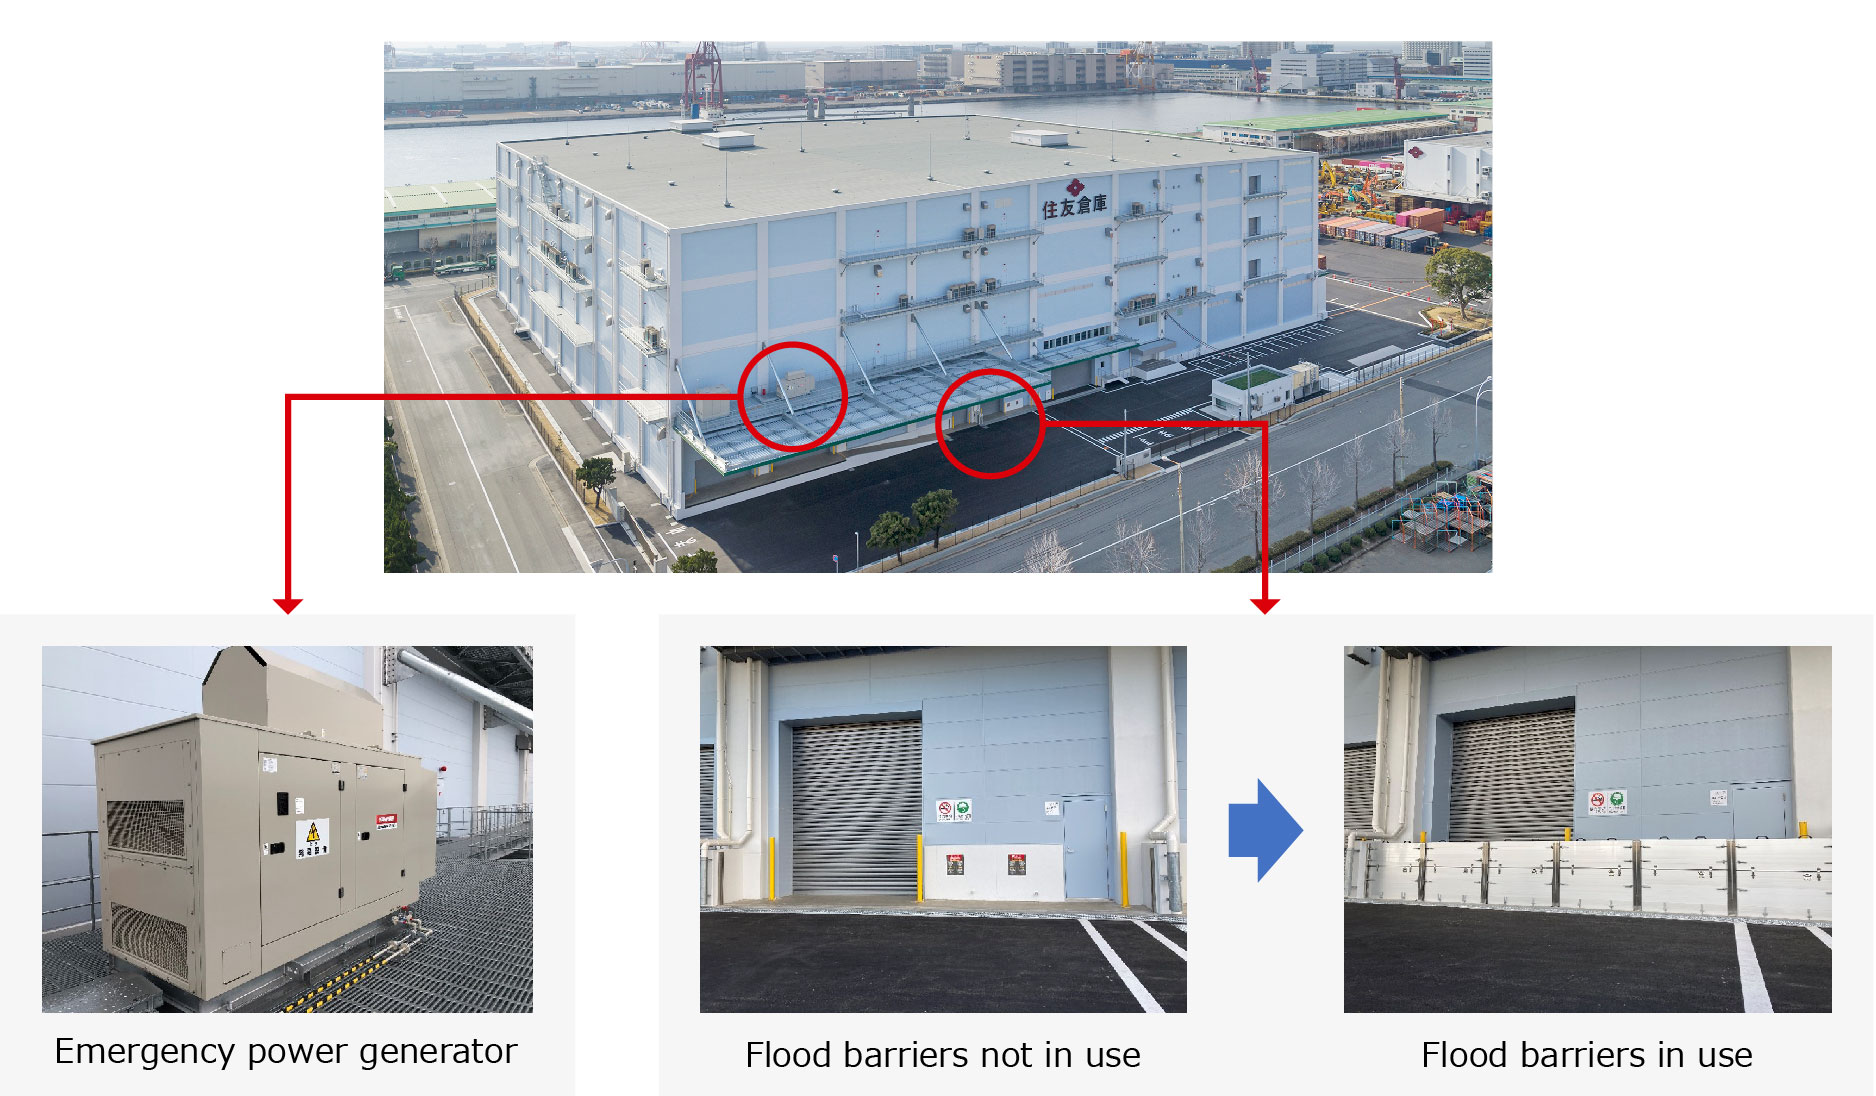 Emergency power generator, Flood barriers not in use and Flood barriers in use